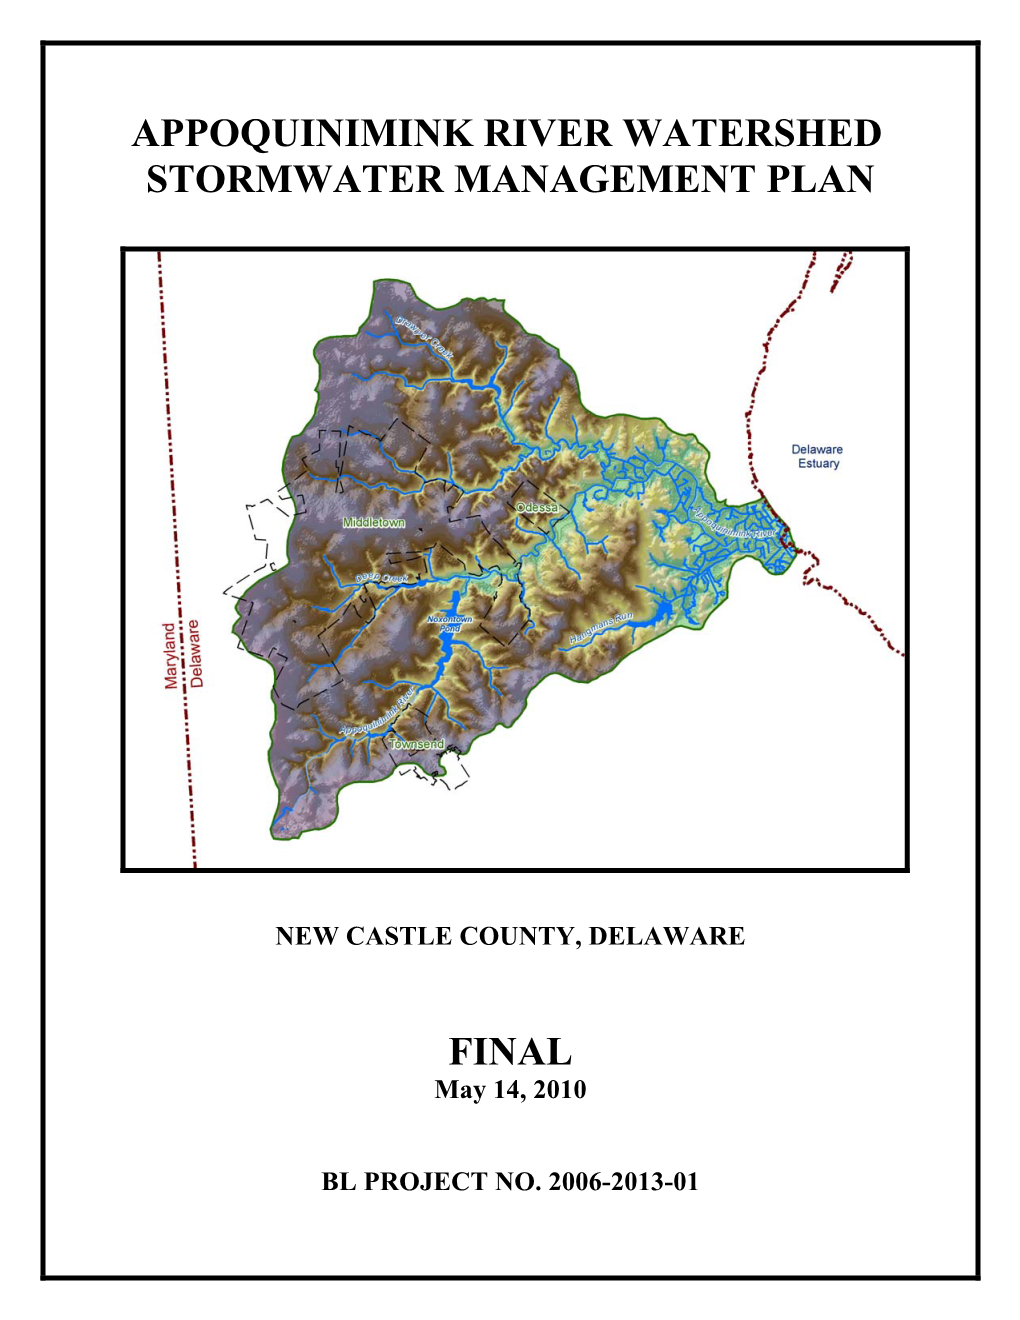 Appoquinimink River Watershed Stormwater Management Plan